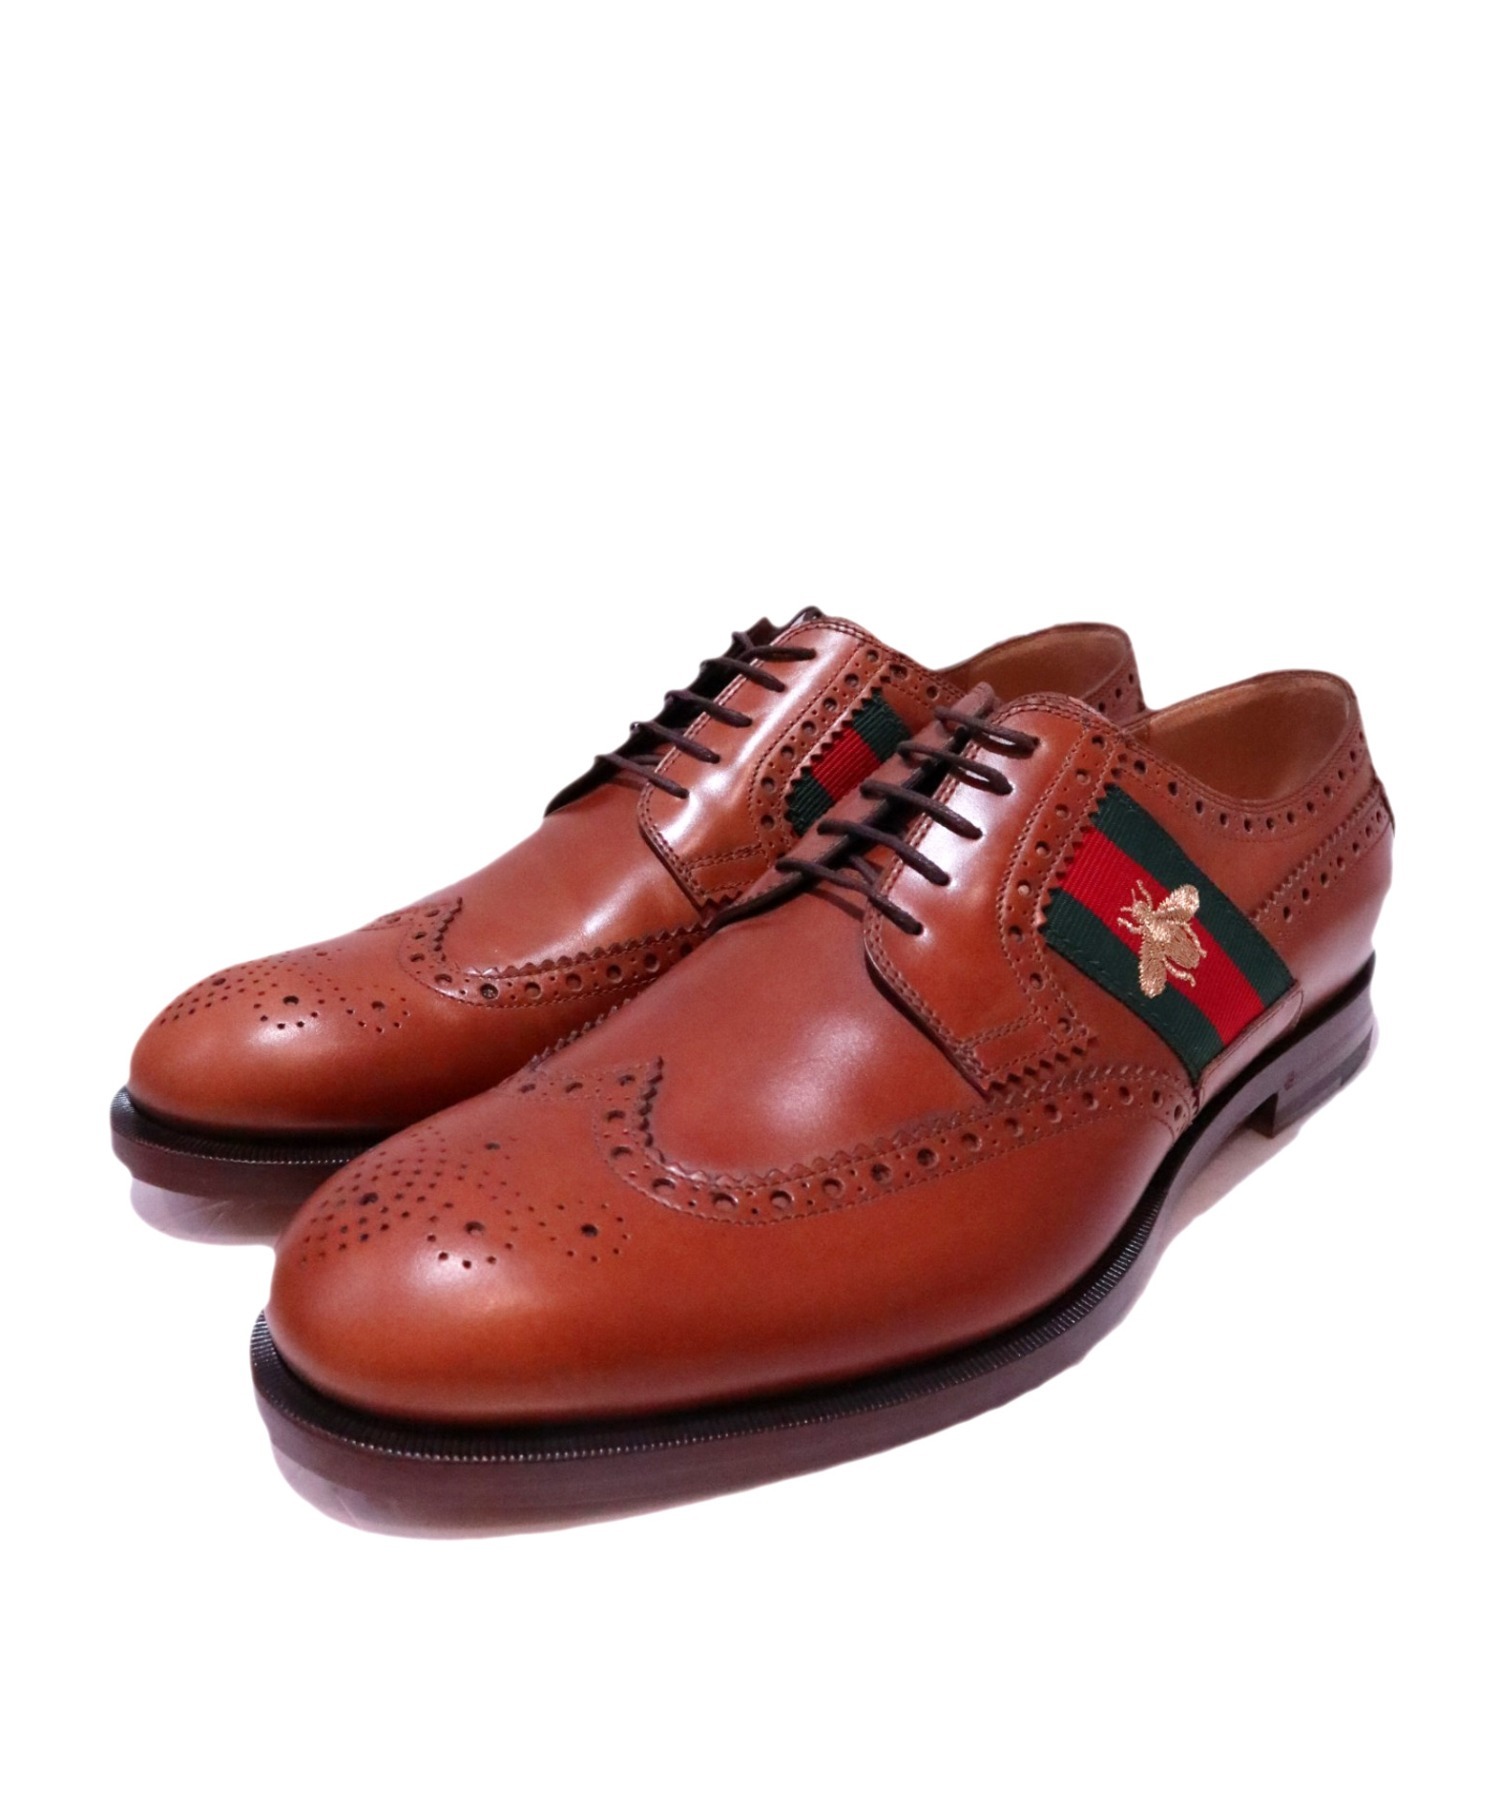 GUCCI LEATHER WING TIP SHOES MADE IN ITALY/グッチレザーウィング